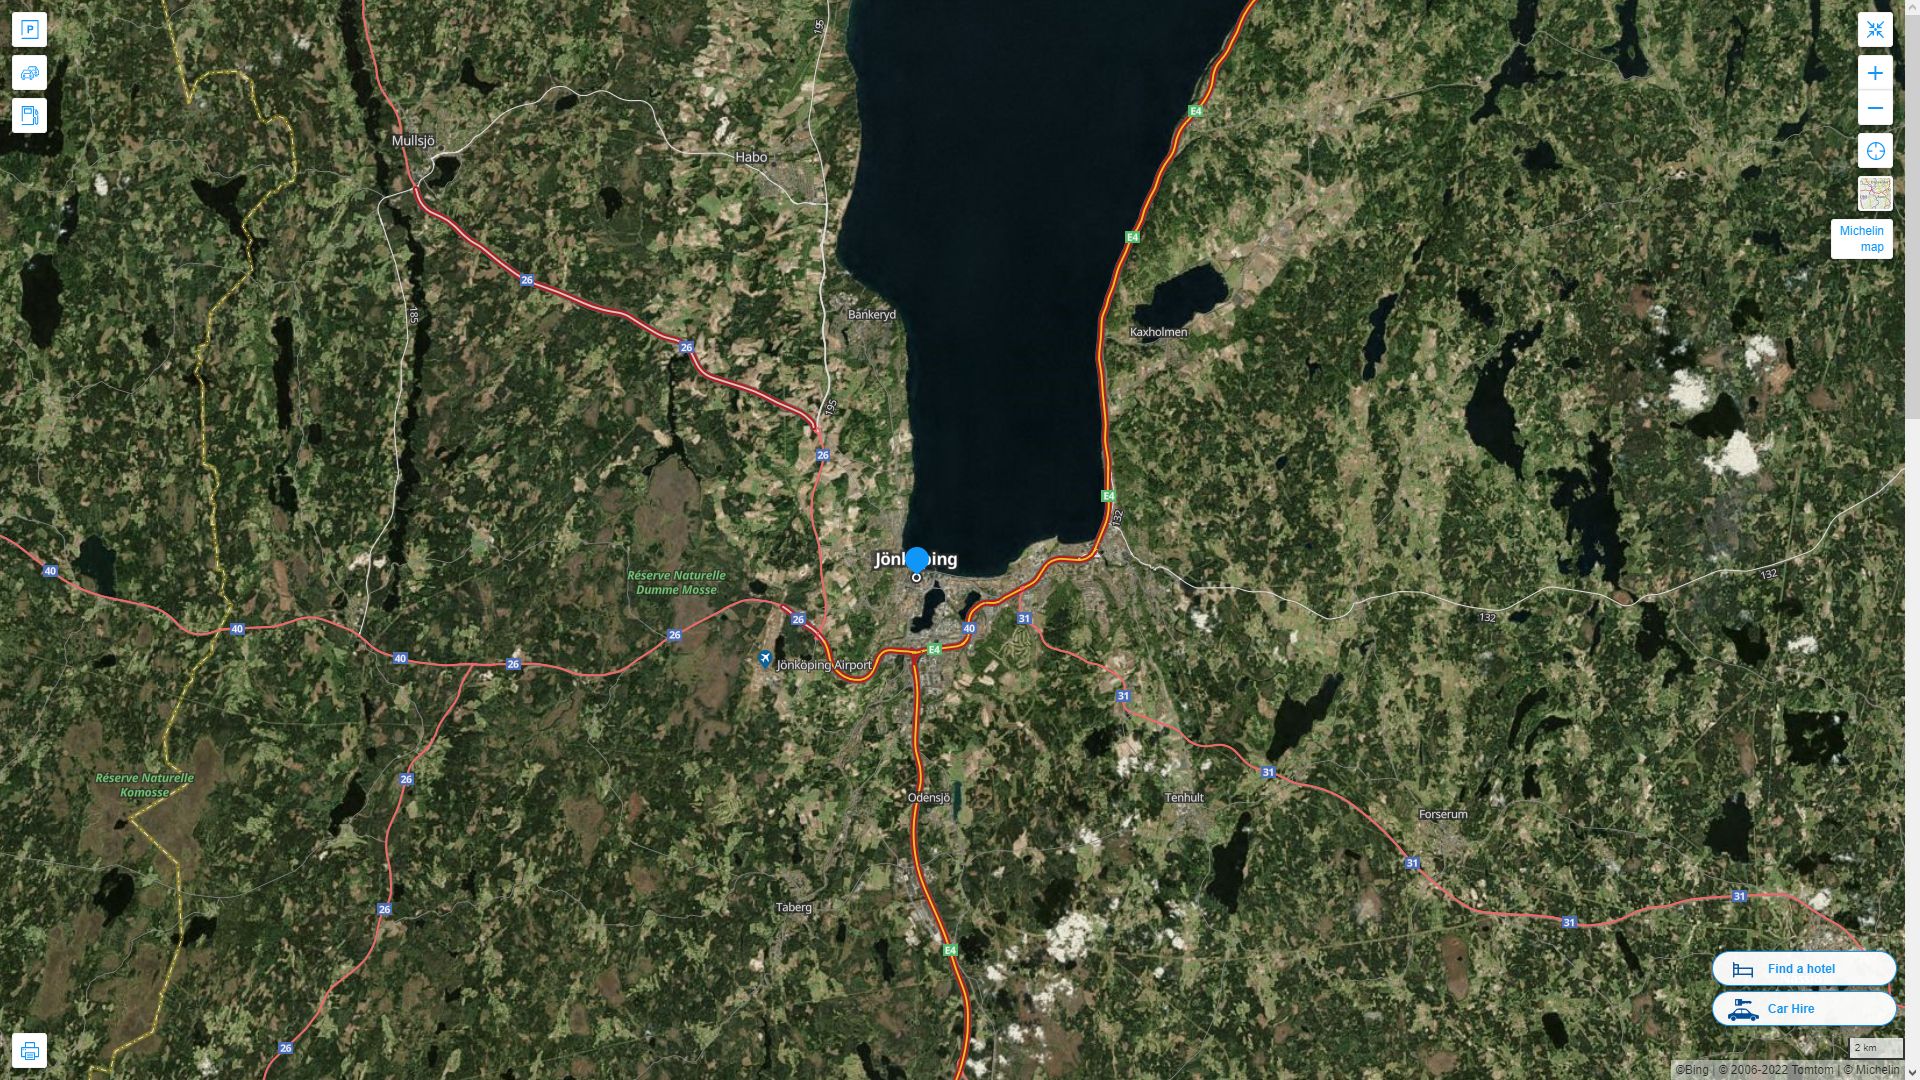 Jonkopin Highway and Road Map with Satellite View